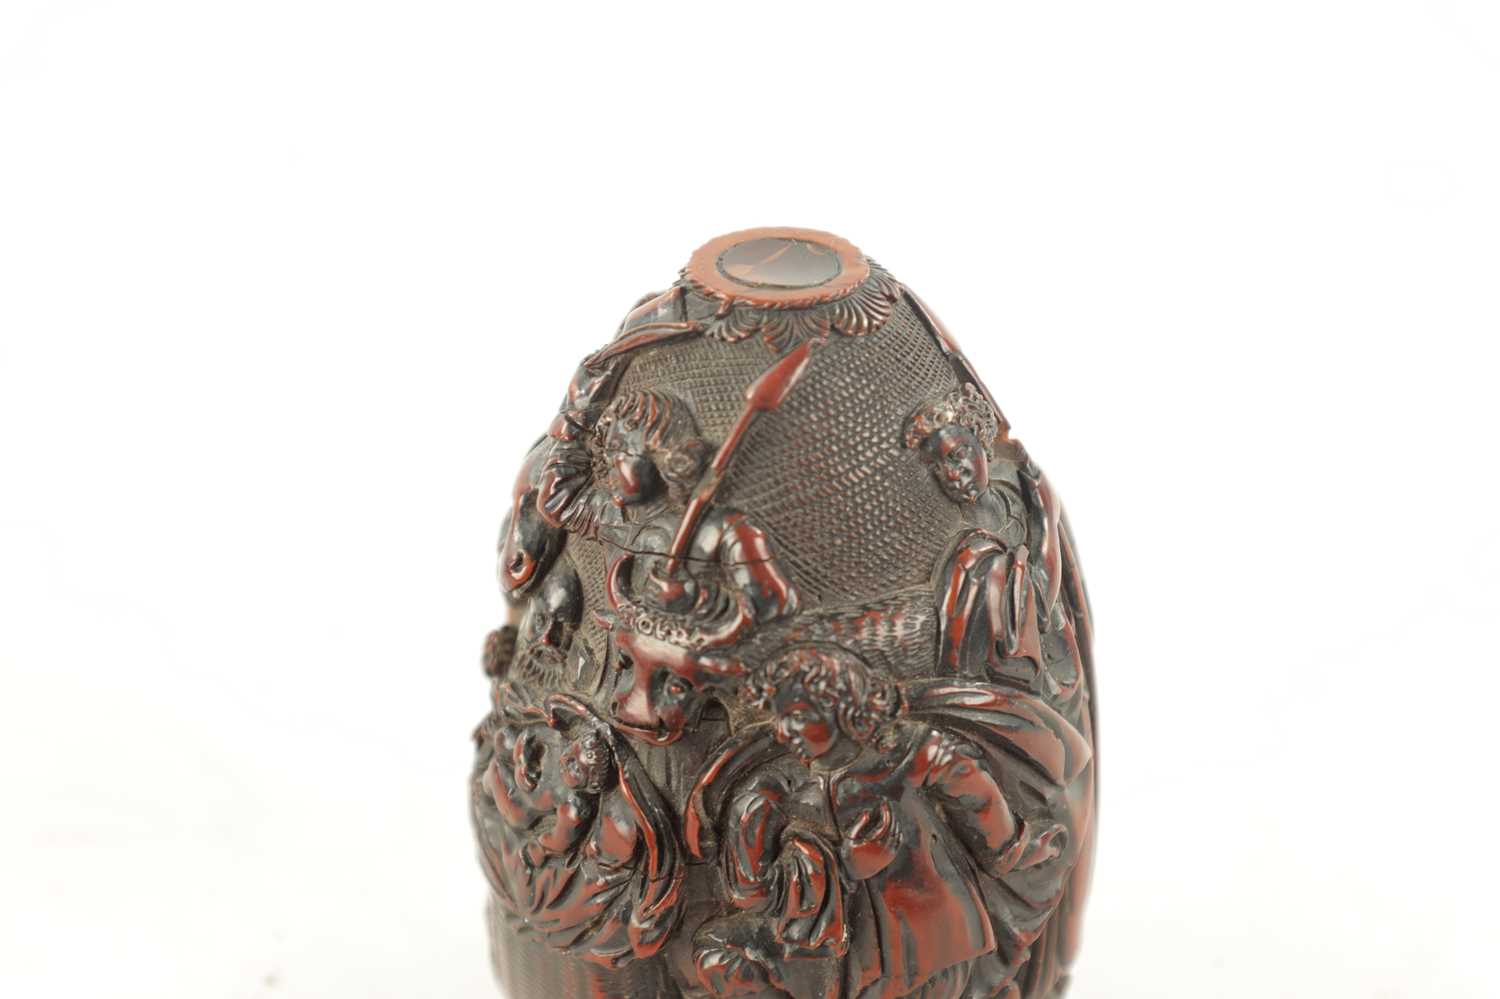 A FINE 18TH CENTURY FRENCH CARVED COQUILLA NUT SNUFF BOX - Image 4 of 4